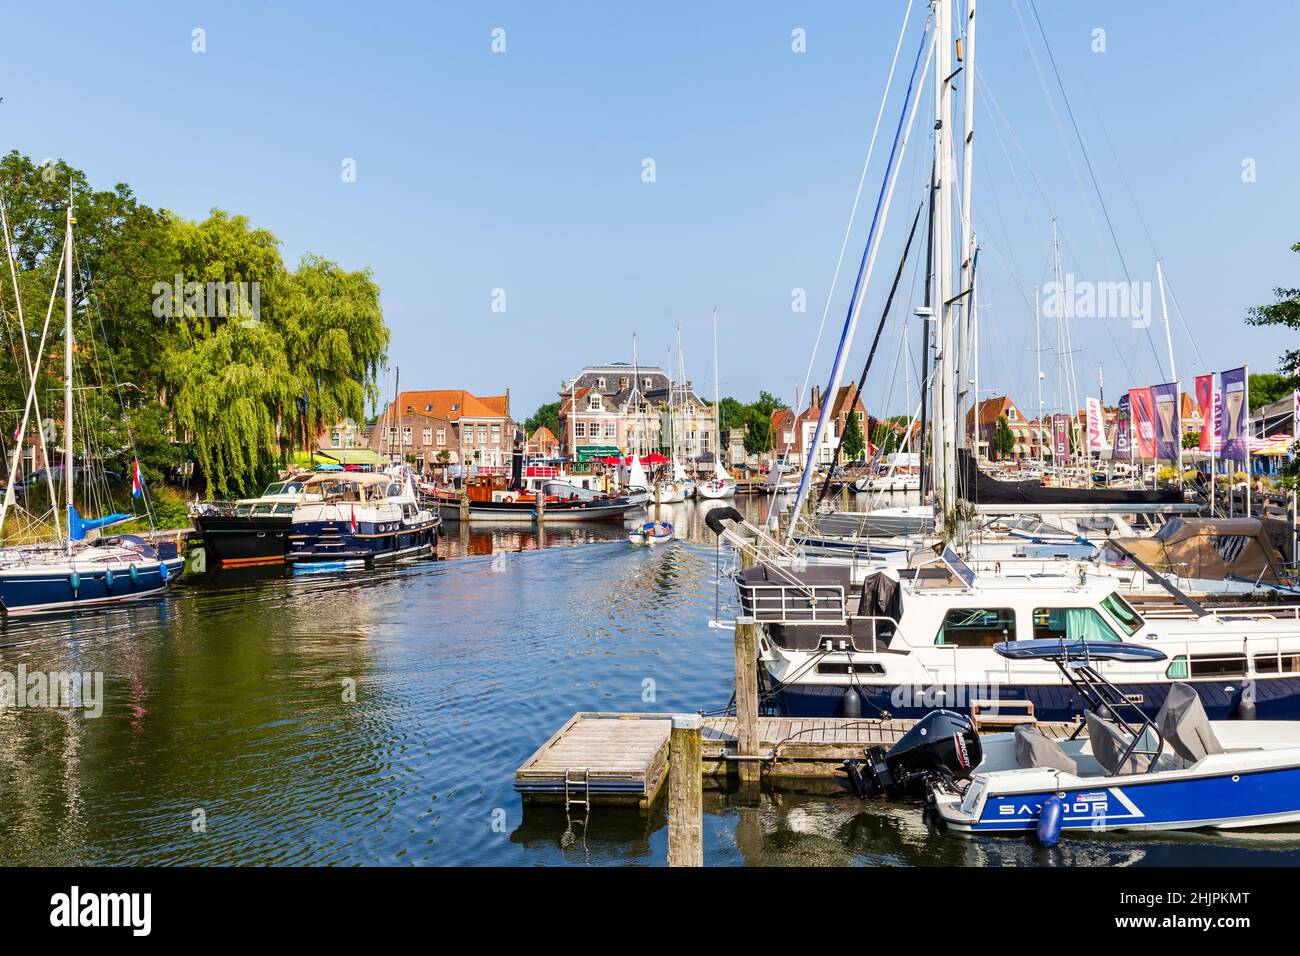 Enkhuizen, The Netherlands - July 7, 2021: Cityscape with Drommedaris tower of Enkhuizen North-Holland in The Netherlands Stock Photo